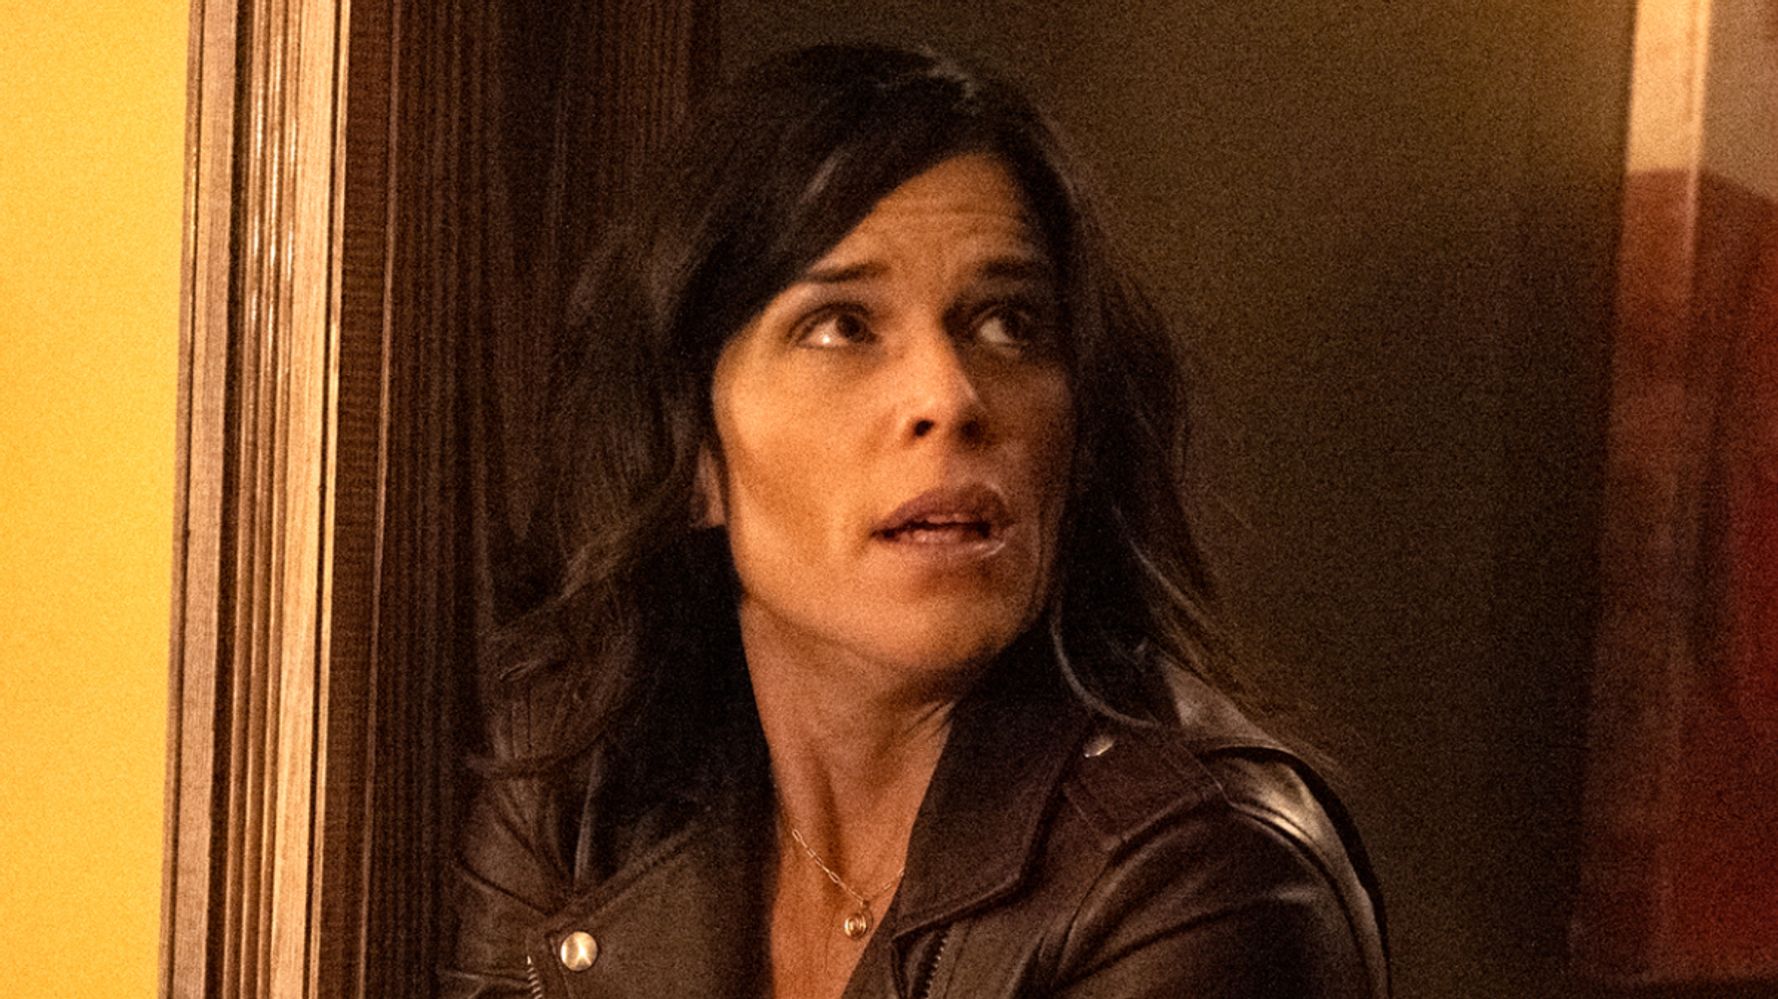 Give Neve Campbell All The Money She Wants For The New 'Scream' Sequel